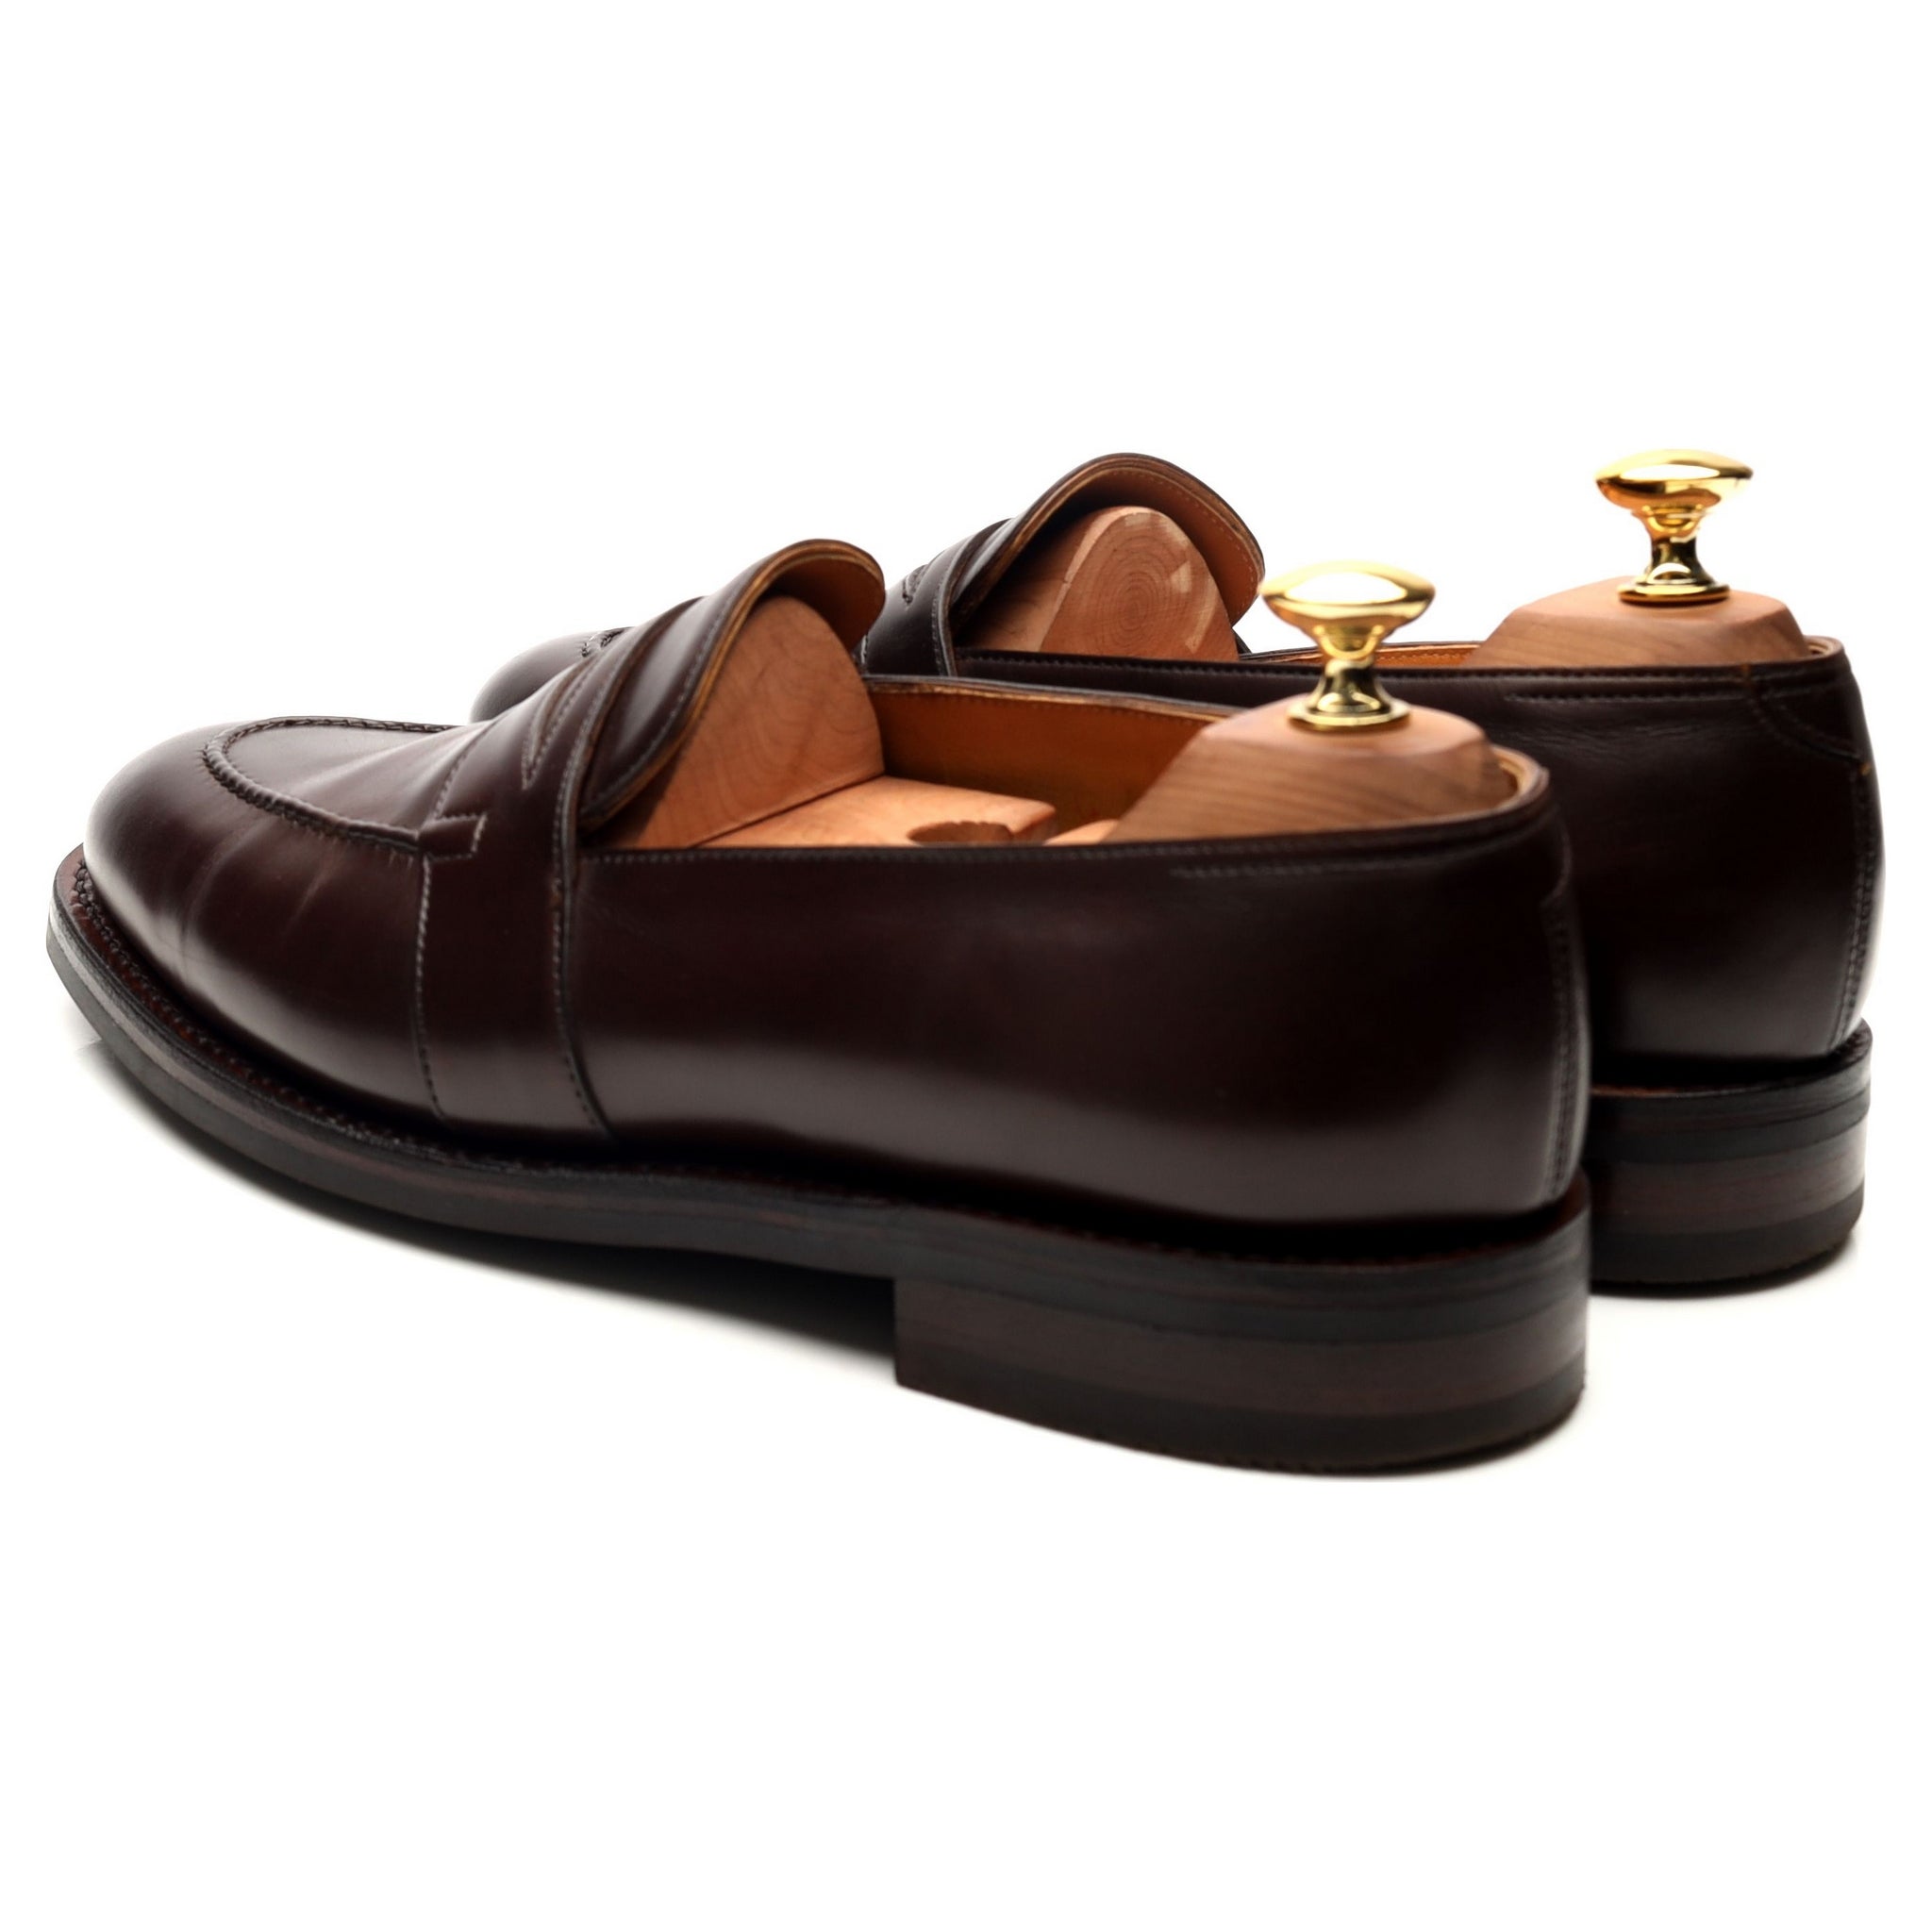 Fencote' Dark Brown Leather Loafers UK 6.5 E - Abbot's Shoes